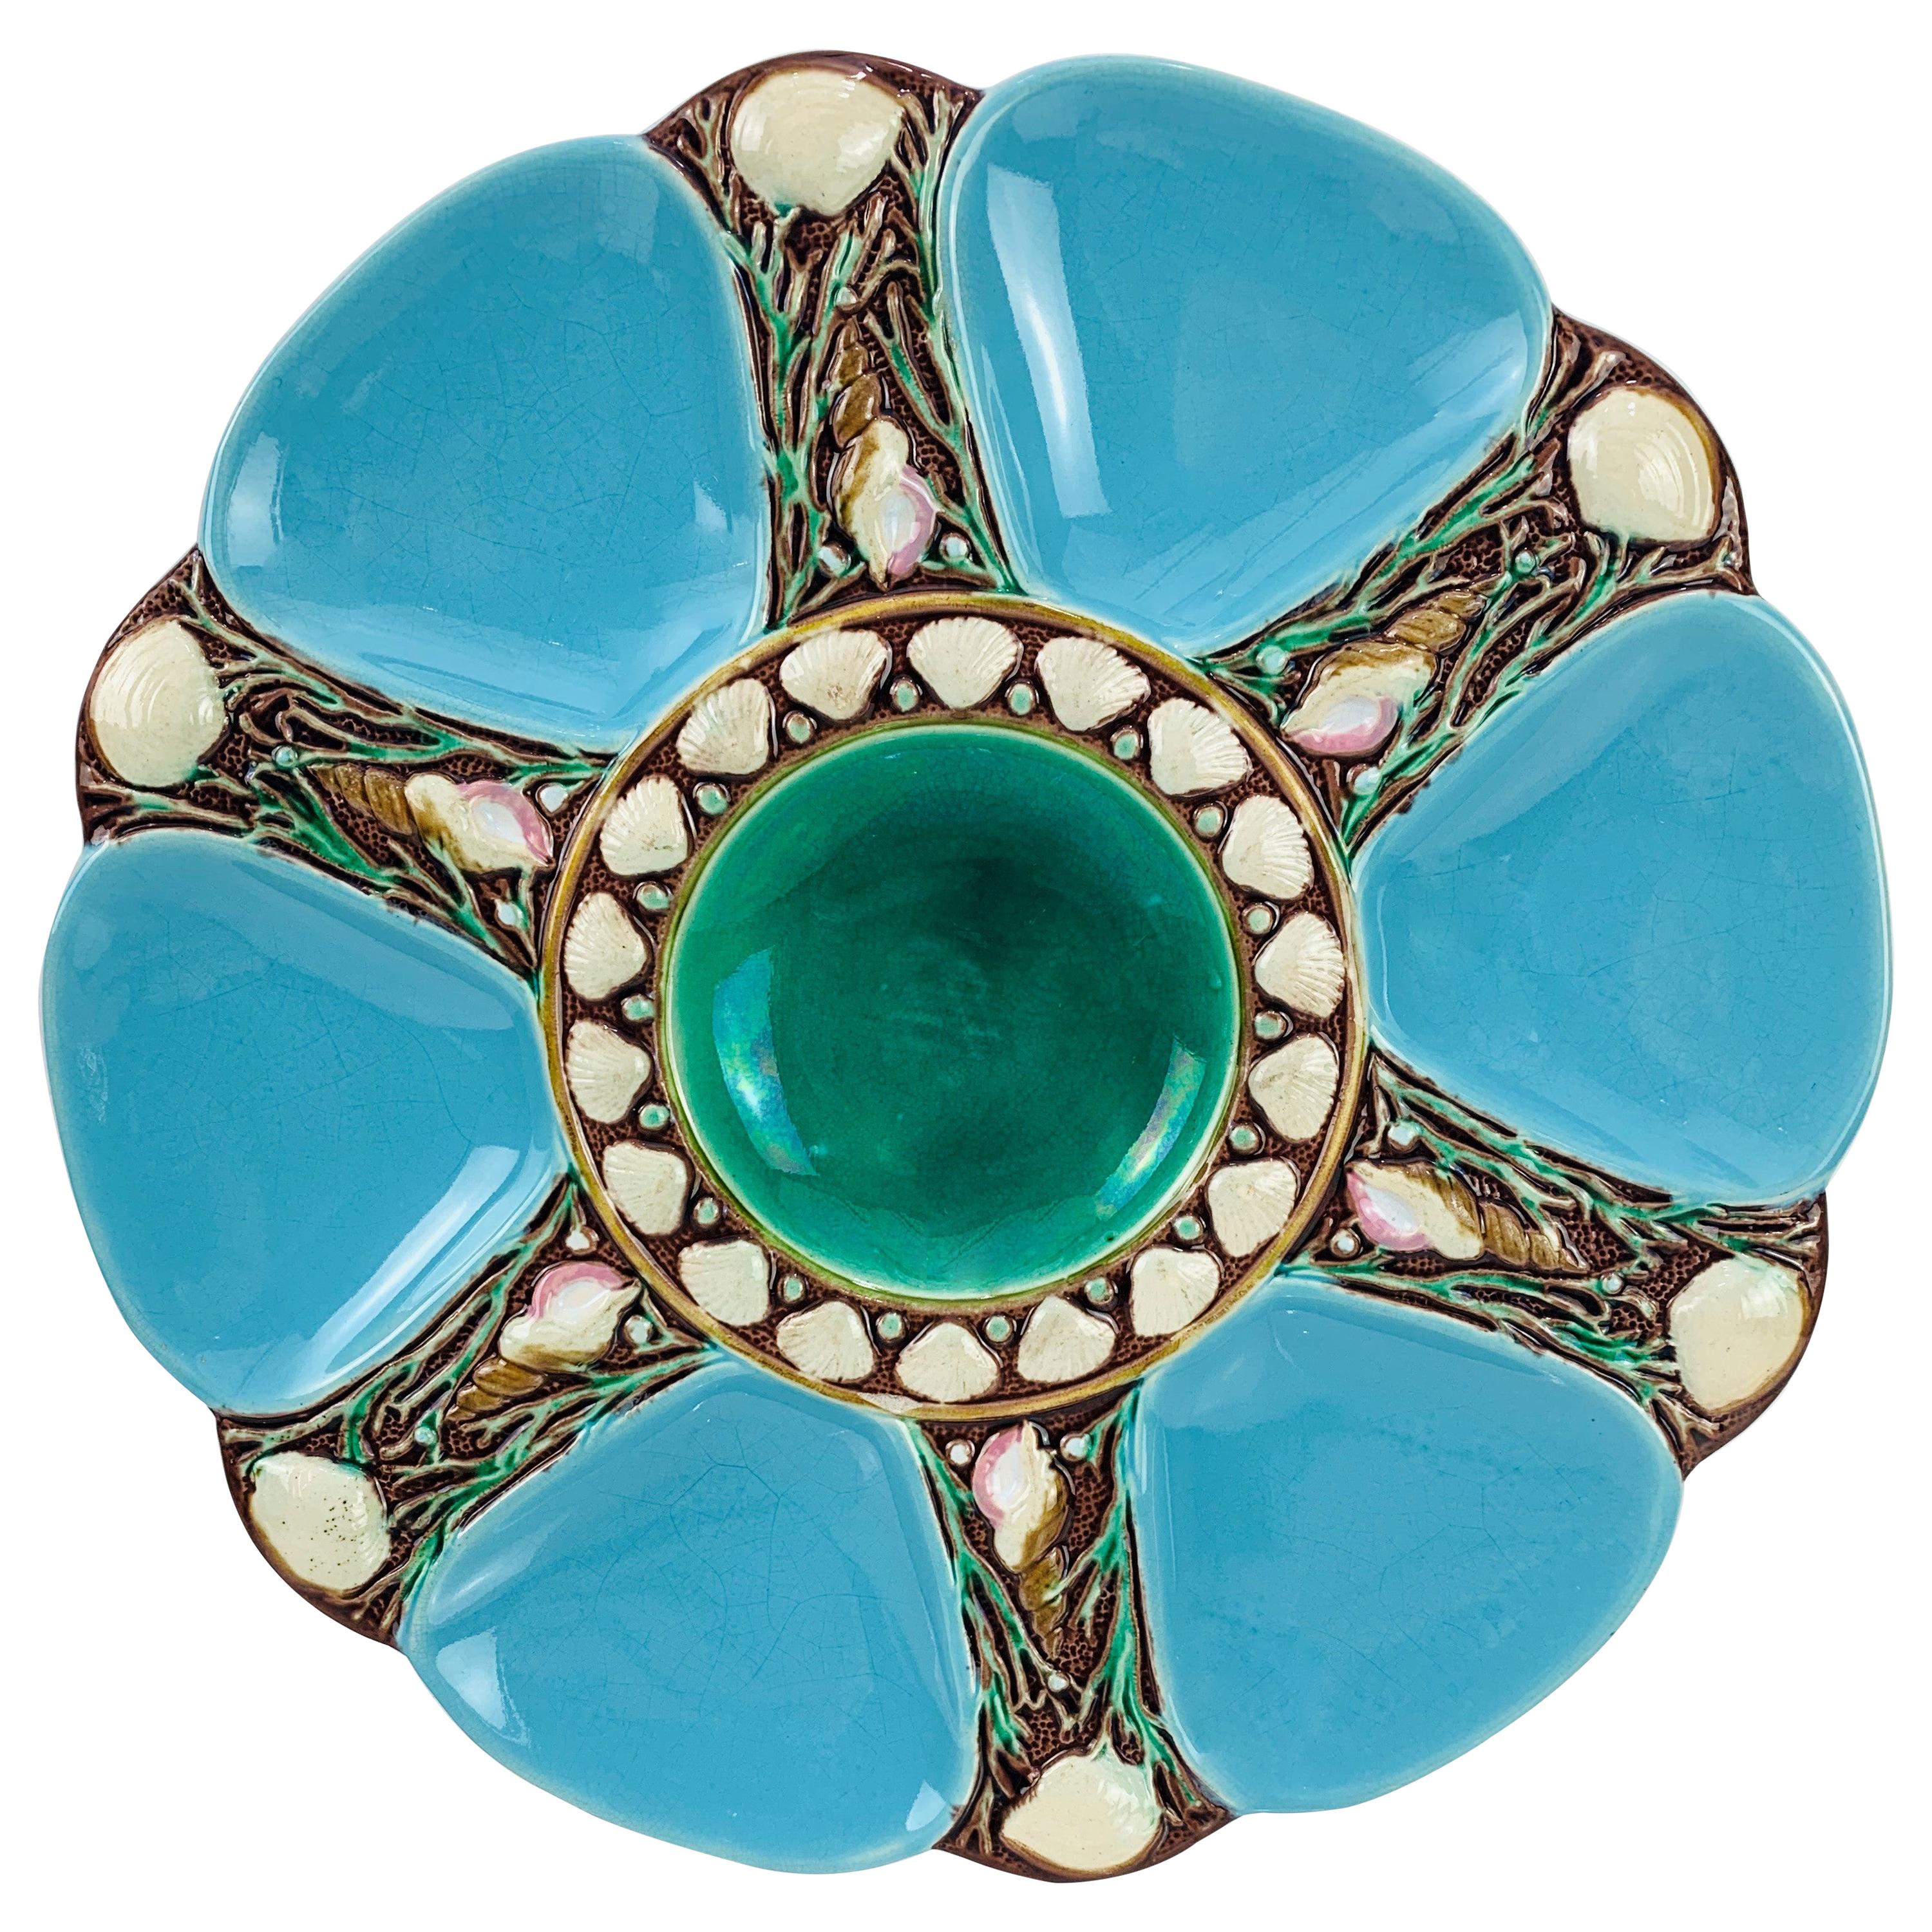 Minton Majolica Turquoise Six Well Oyster Plate, English, Dated 1871